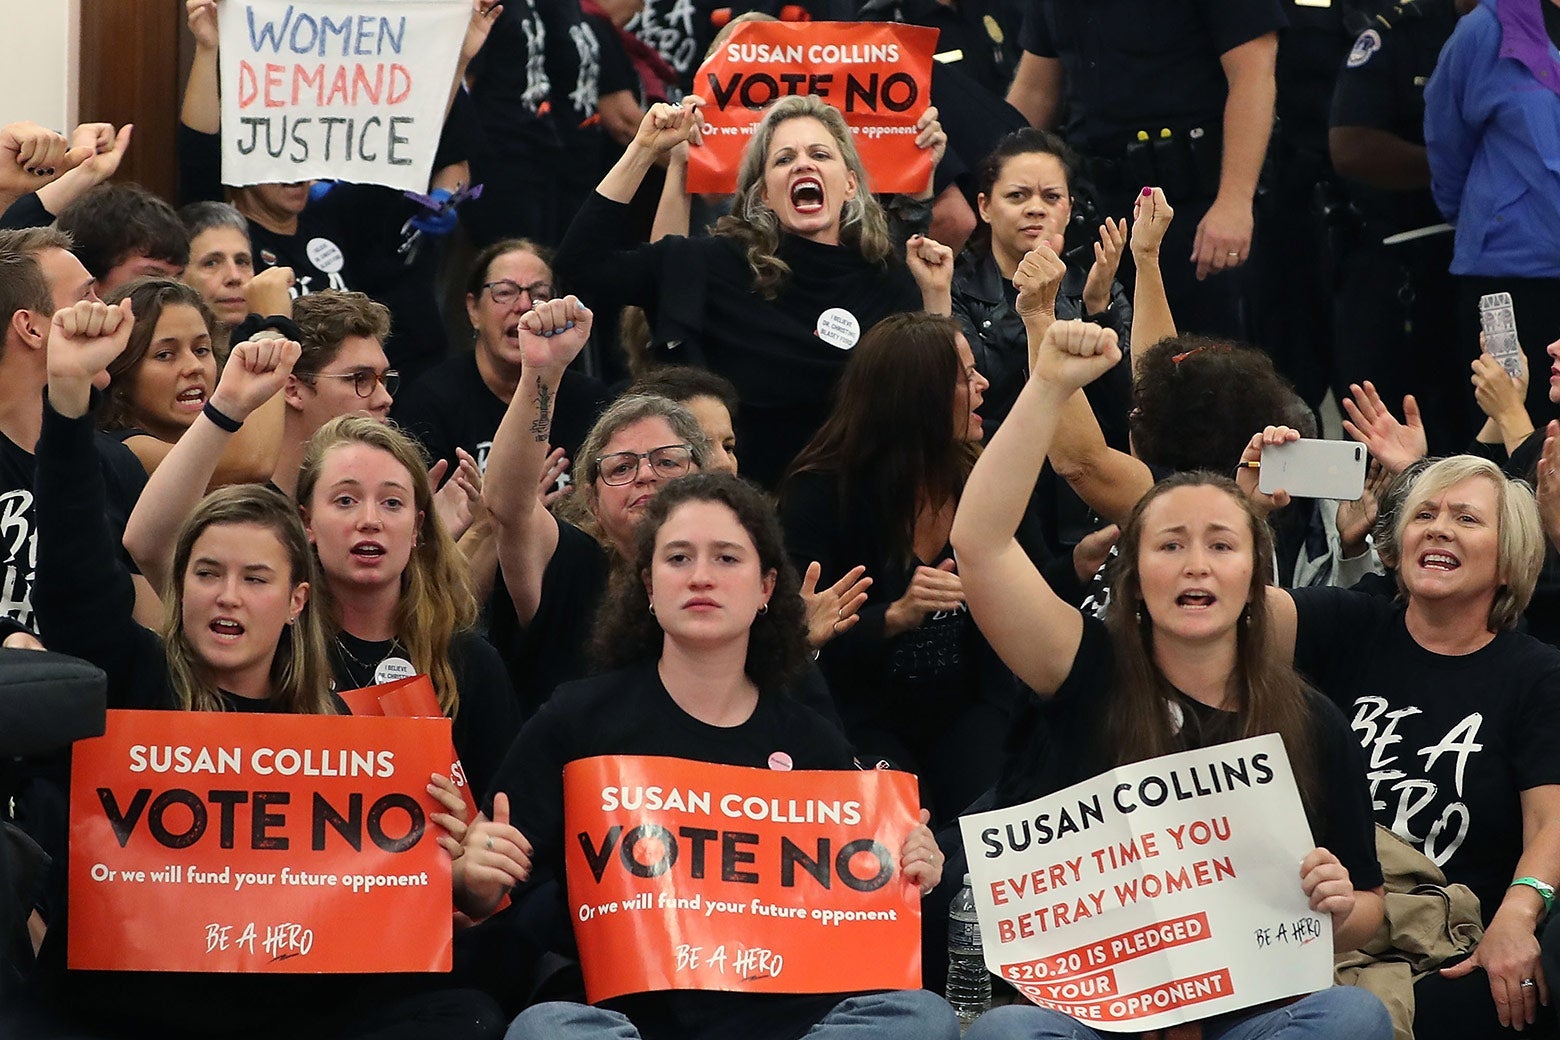 A crowd of women hold up their fists and hold signs that say, "Susan Collins Vote No."